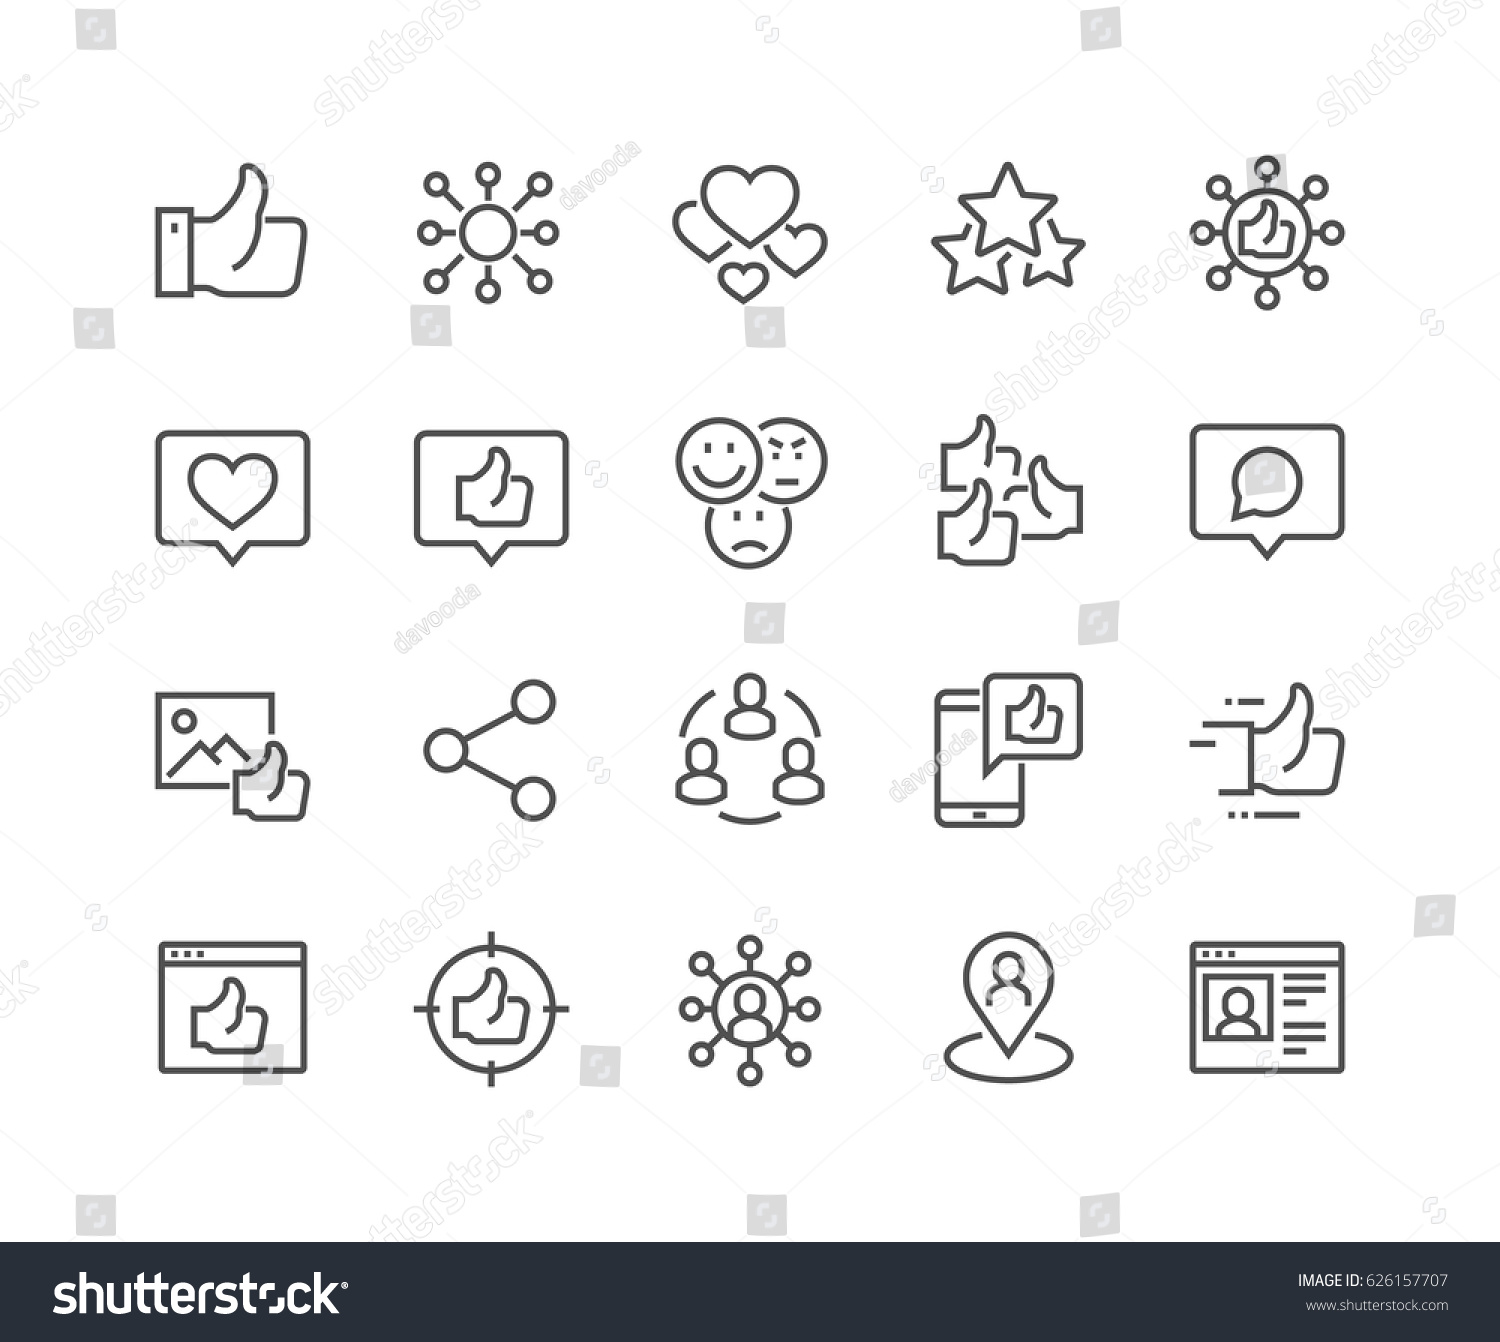 Simple Set of Social Networks Related Vector Line Icons. 
Contains such Icons as Profile Page, Rating, Social Links and more.
Editable Stroke. 48x48 Pixel Perfect. #626157707